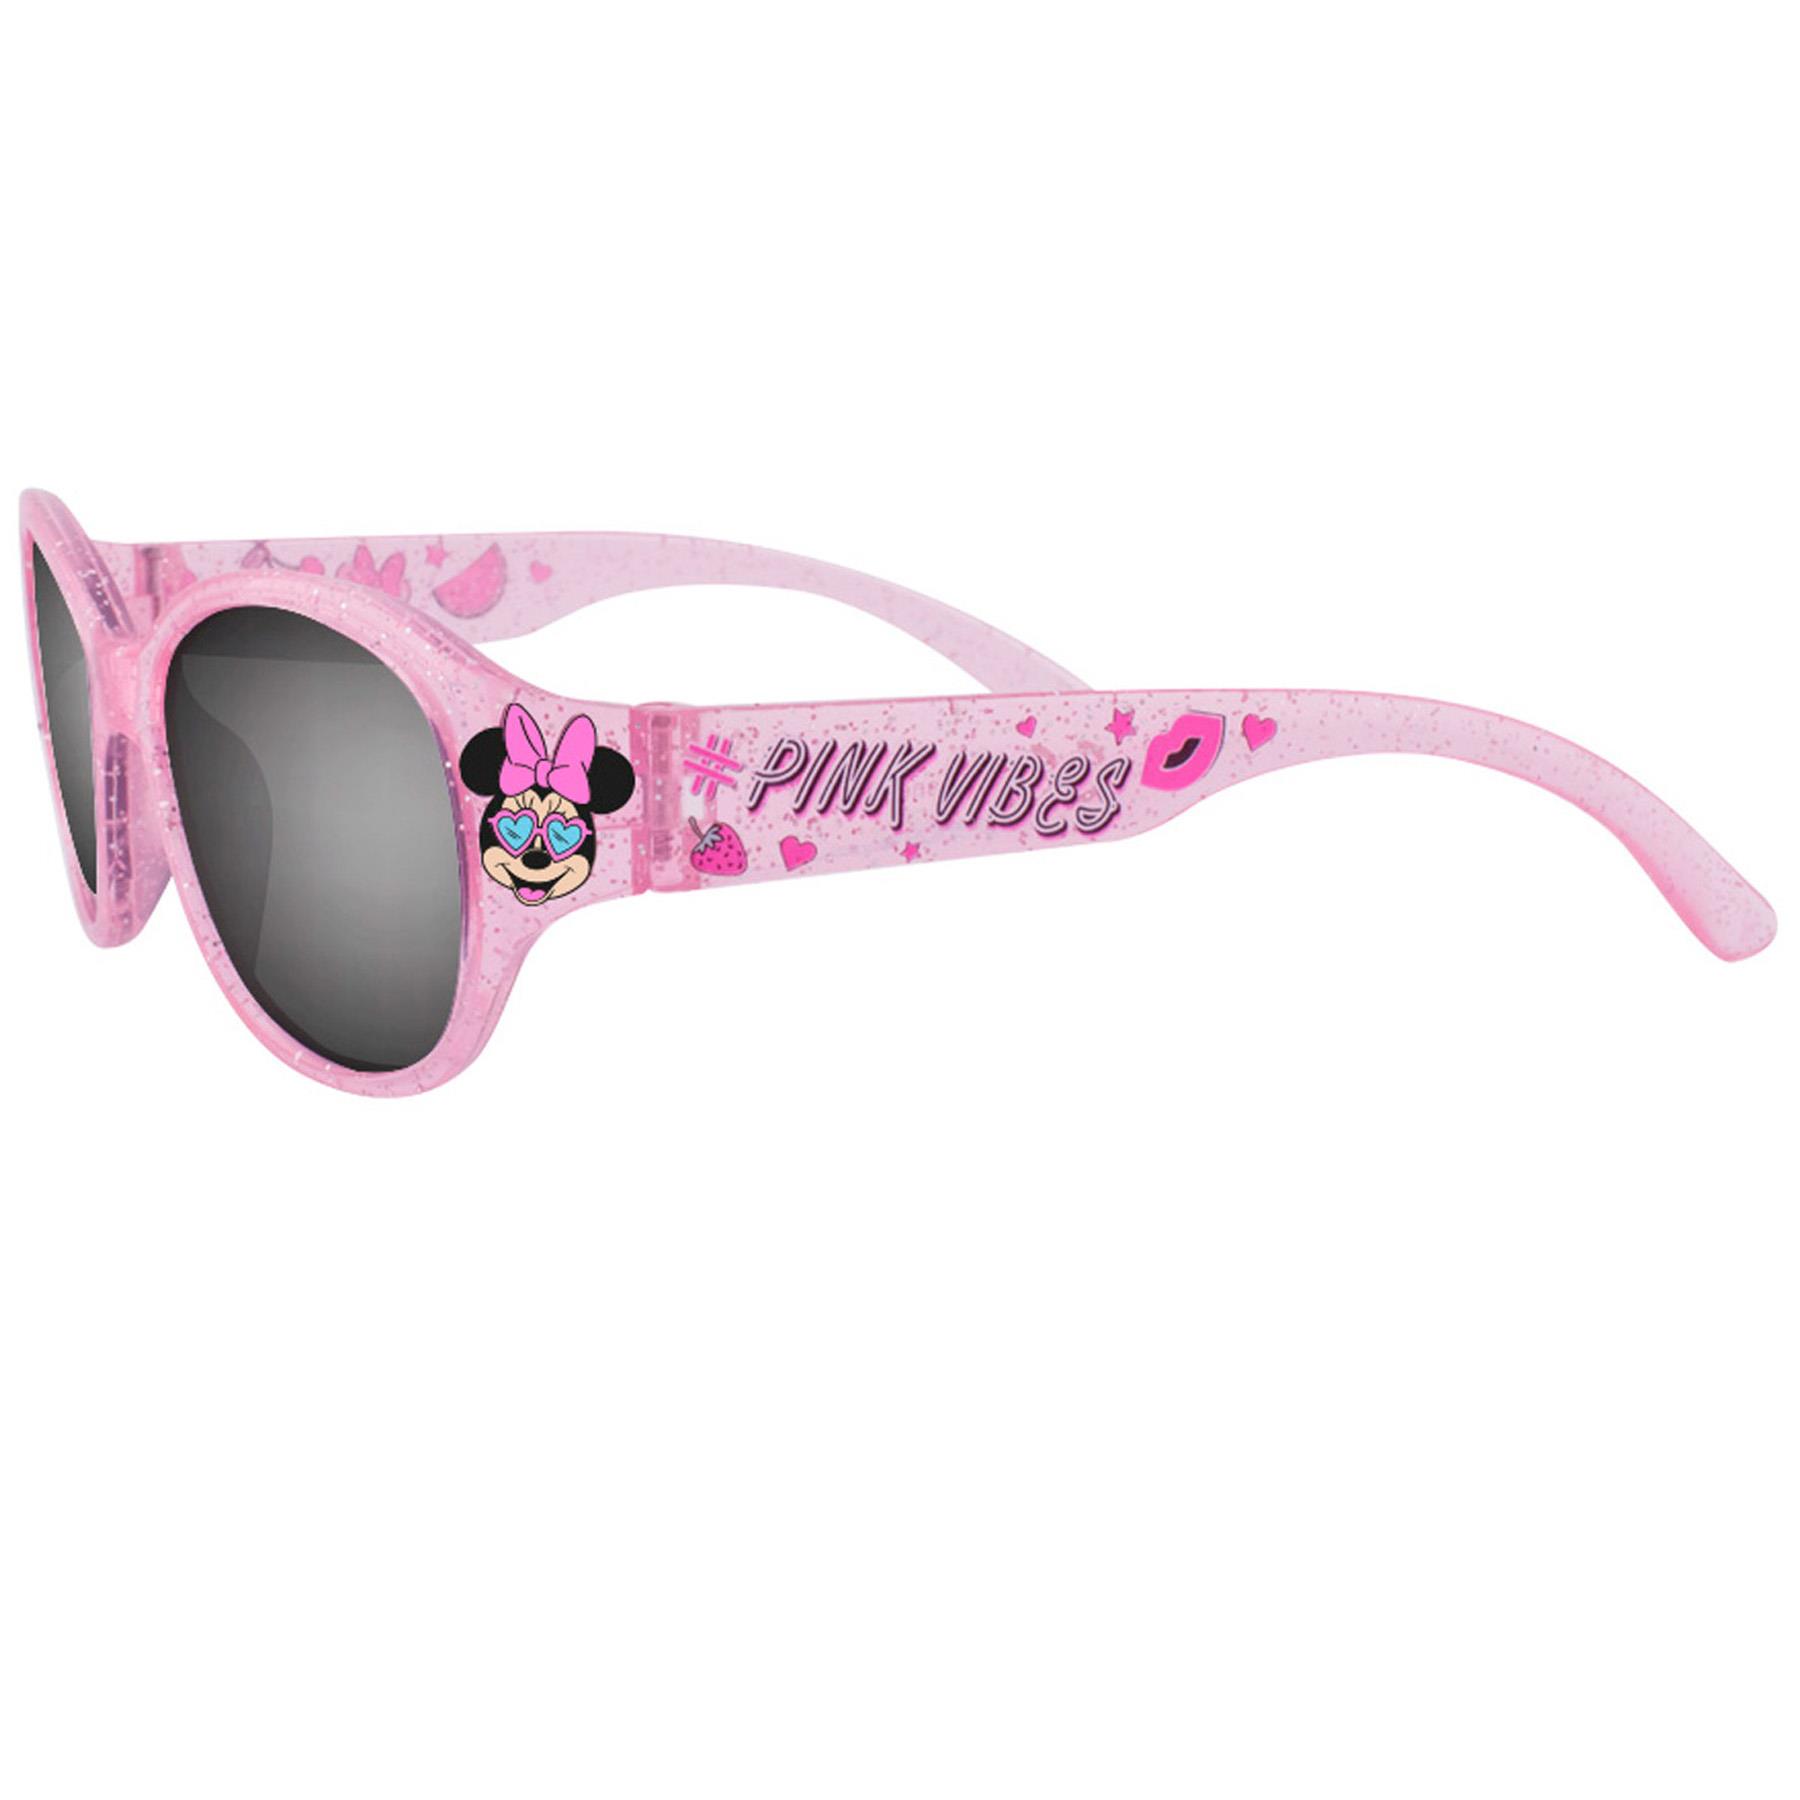 Disney Minnie Mouse Children's Sunglasses UV protection for Holiday - MIN30